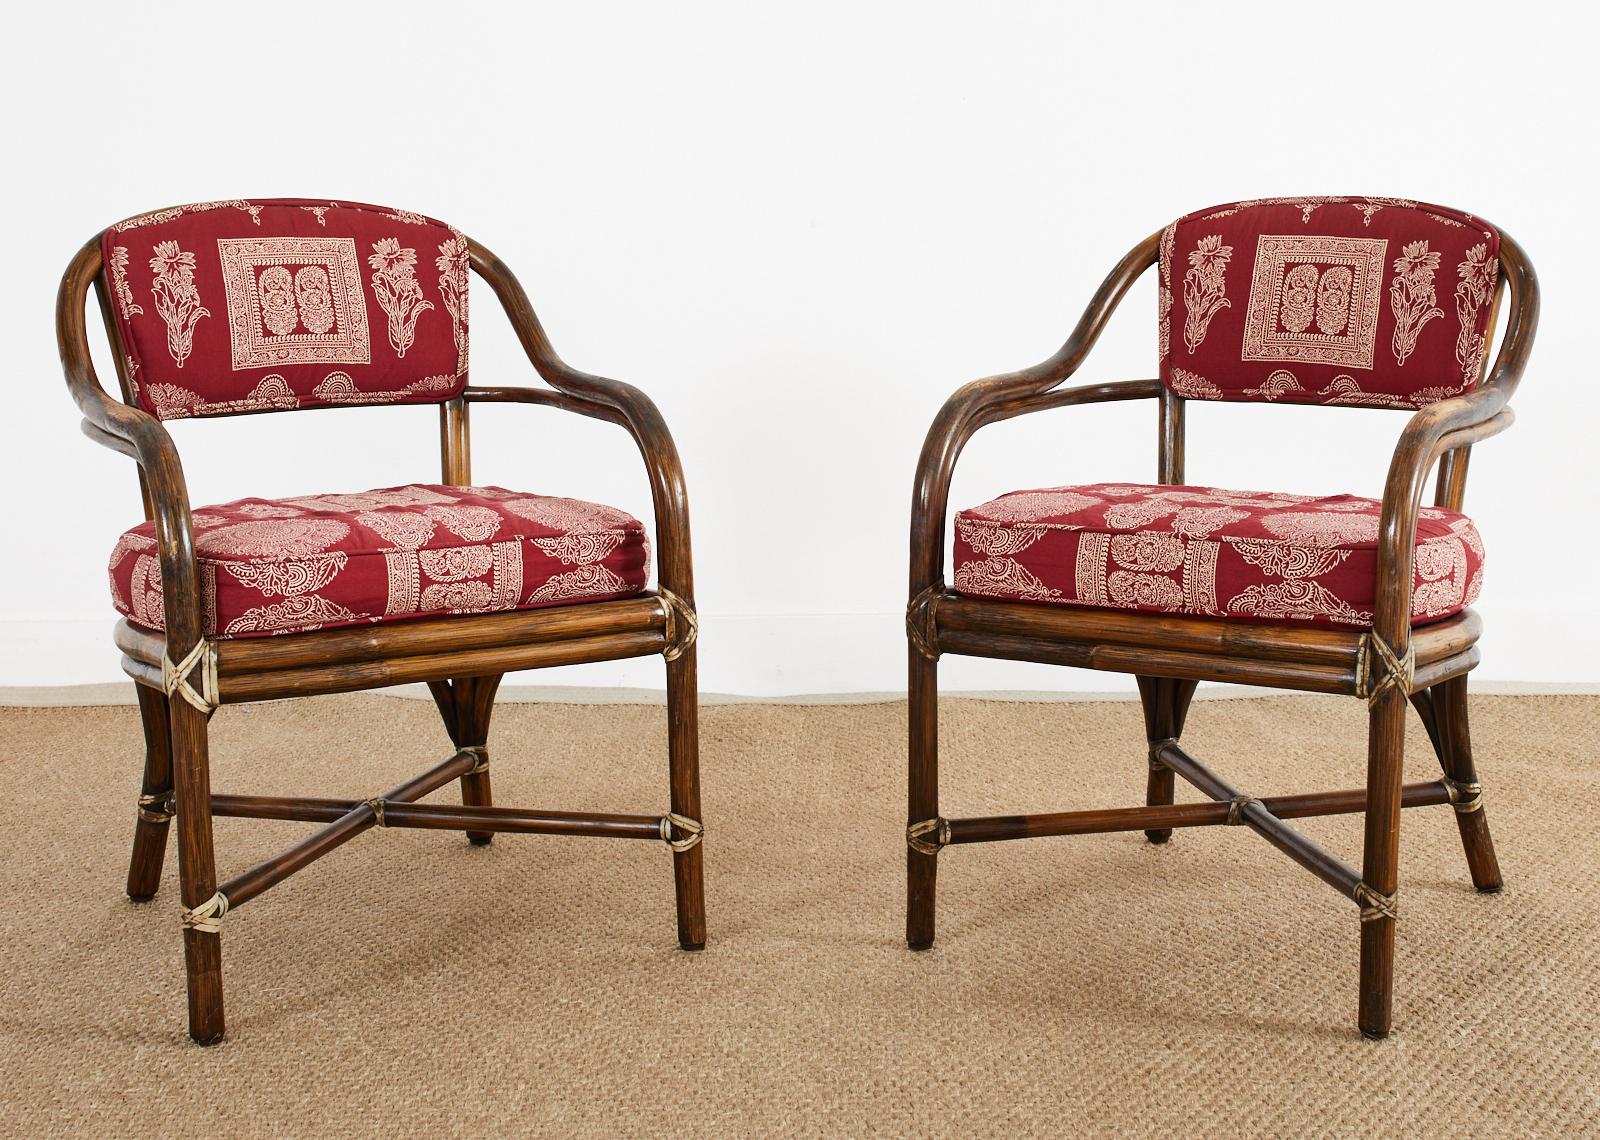 Organic Modern Pair of McGuire Armchairs with Rajasthan Style Upholstery